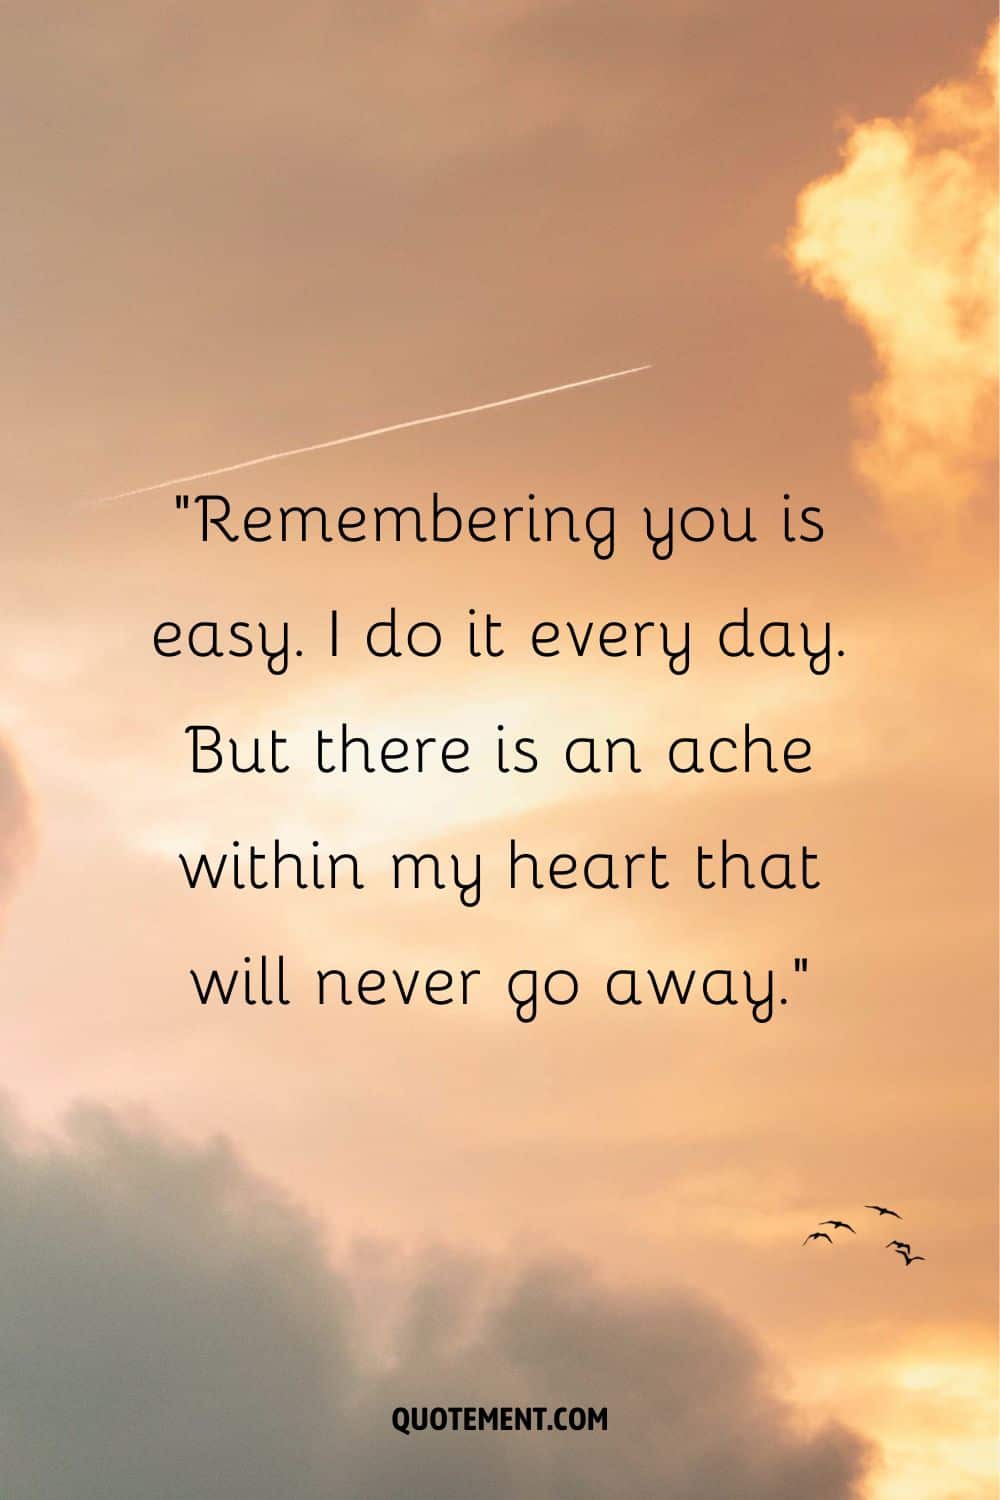 Remembering you is easy.  I do it every day. But there is an ache within my heart that will never go away